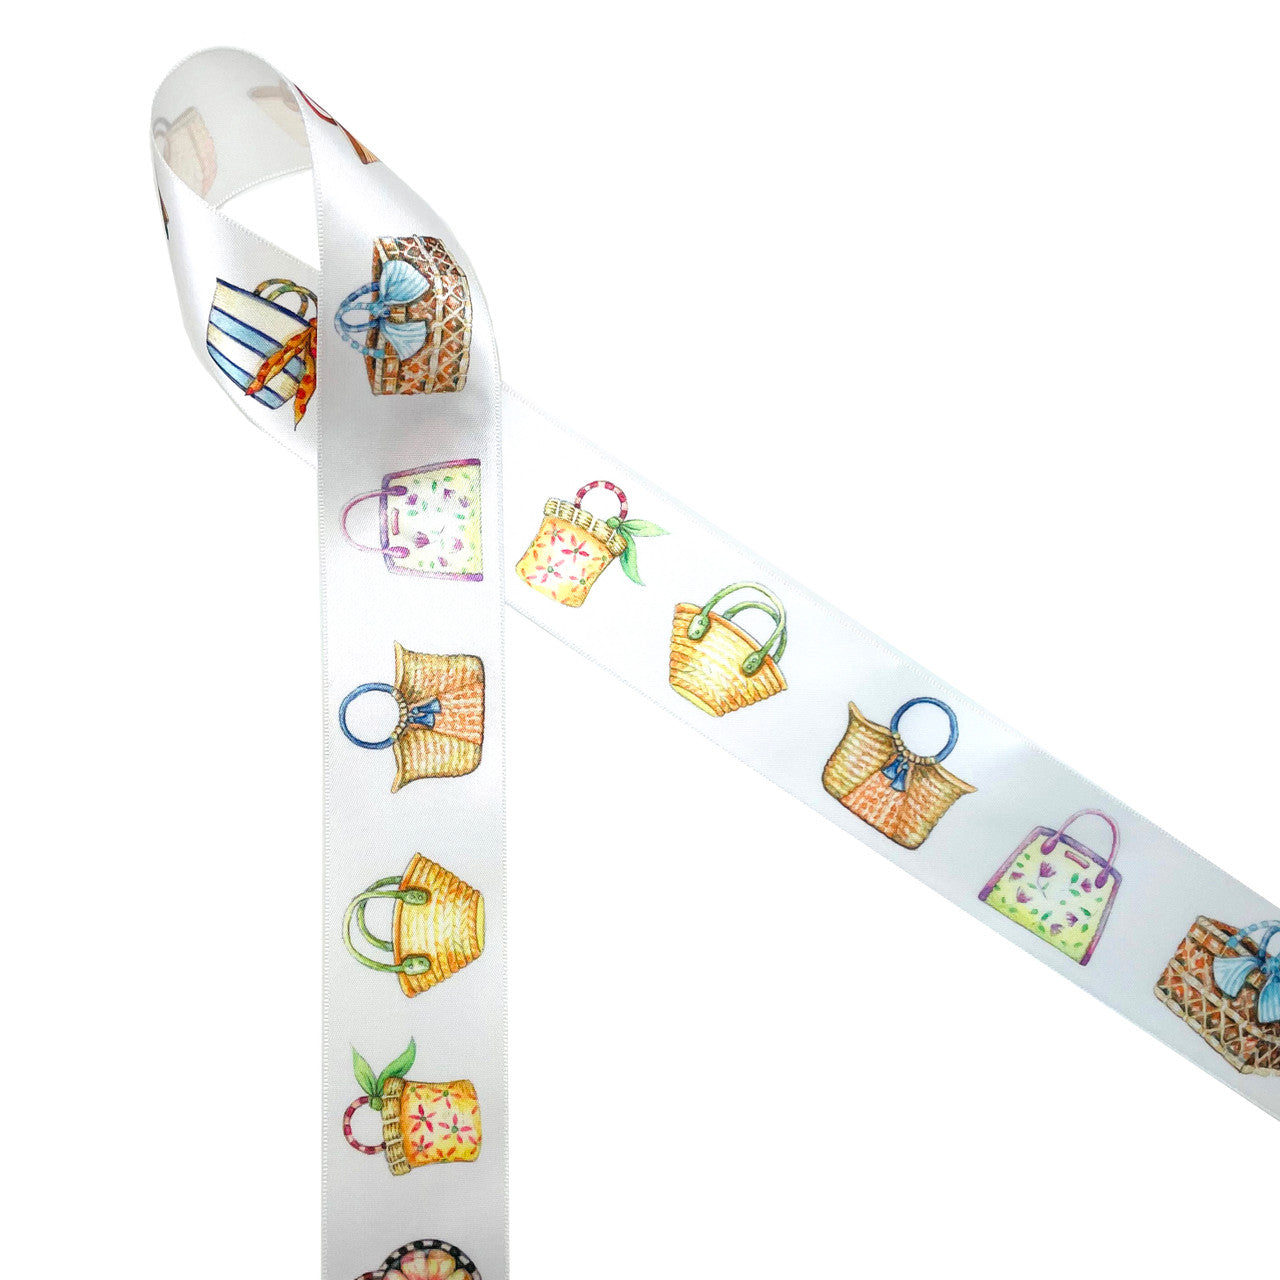 Beautiful watercolor beach bags each one unique and colorful line up on 1.5" white single face satin ribbon ideal for gift wrap wedding decor, bridal showers and Summer gifting! Use this gorgeous ribbon for quilting and sewing projects too! All our ribbon is designed and printed in the USA